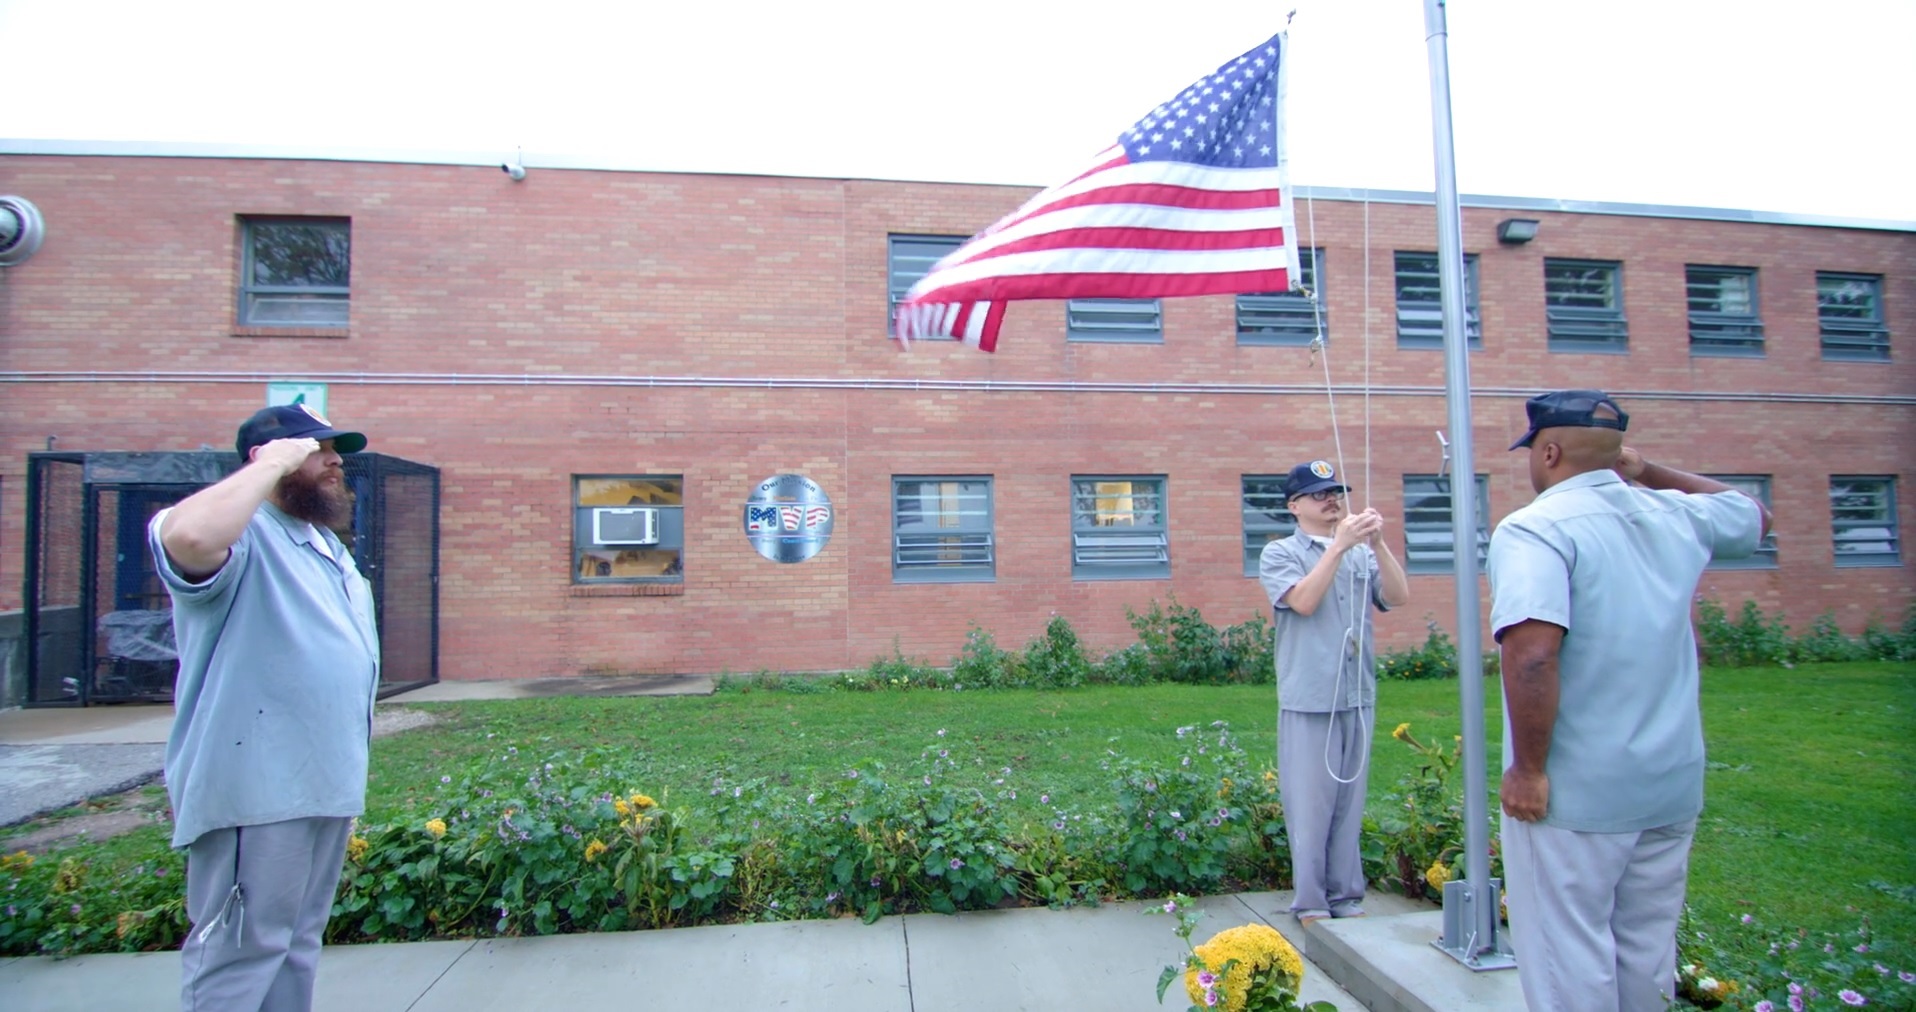 Offenders saluting a U.S. flag at Boonville Correctional Center.